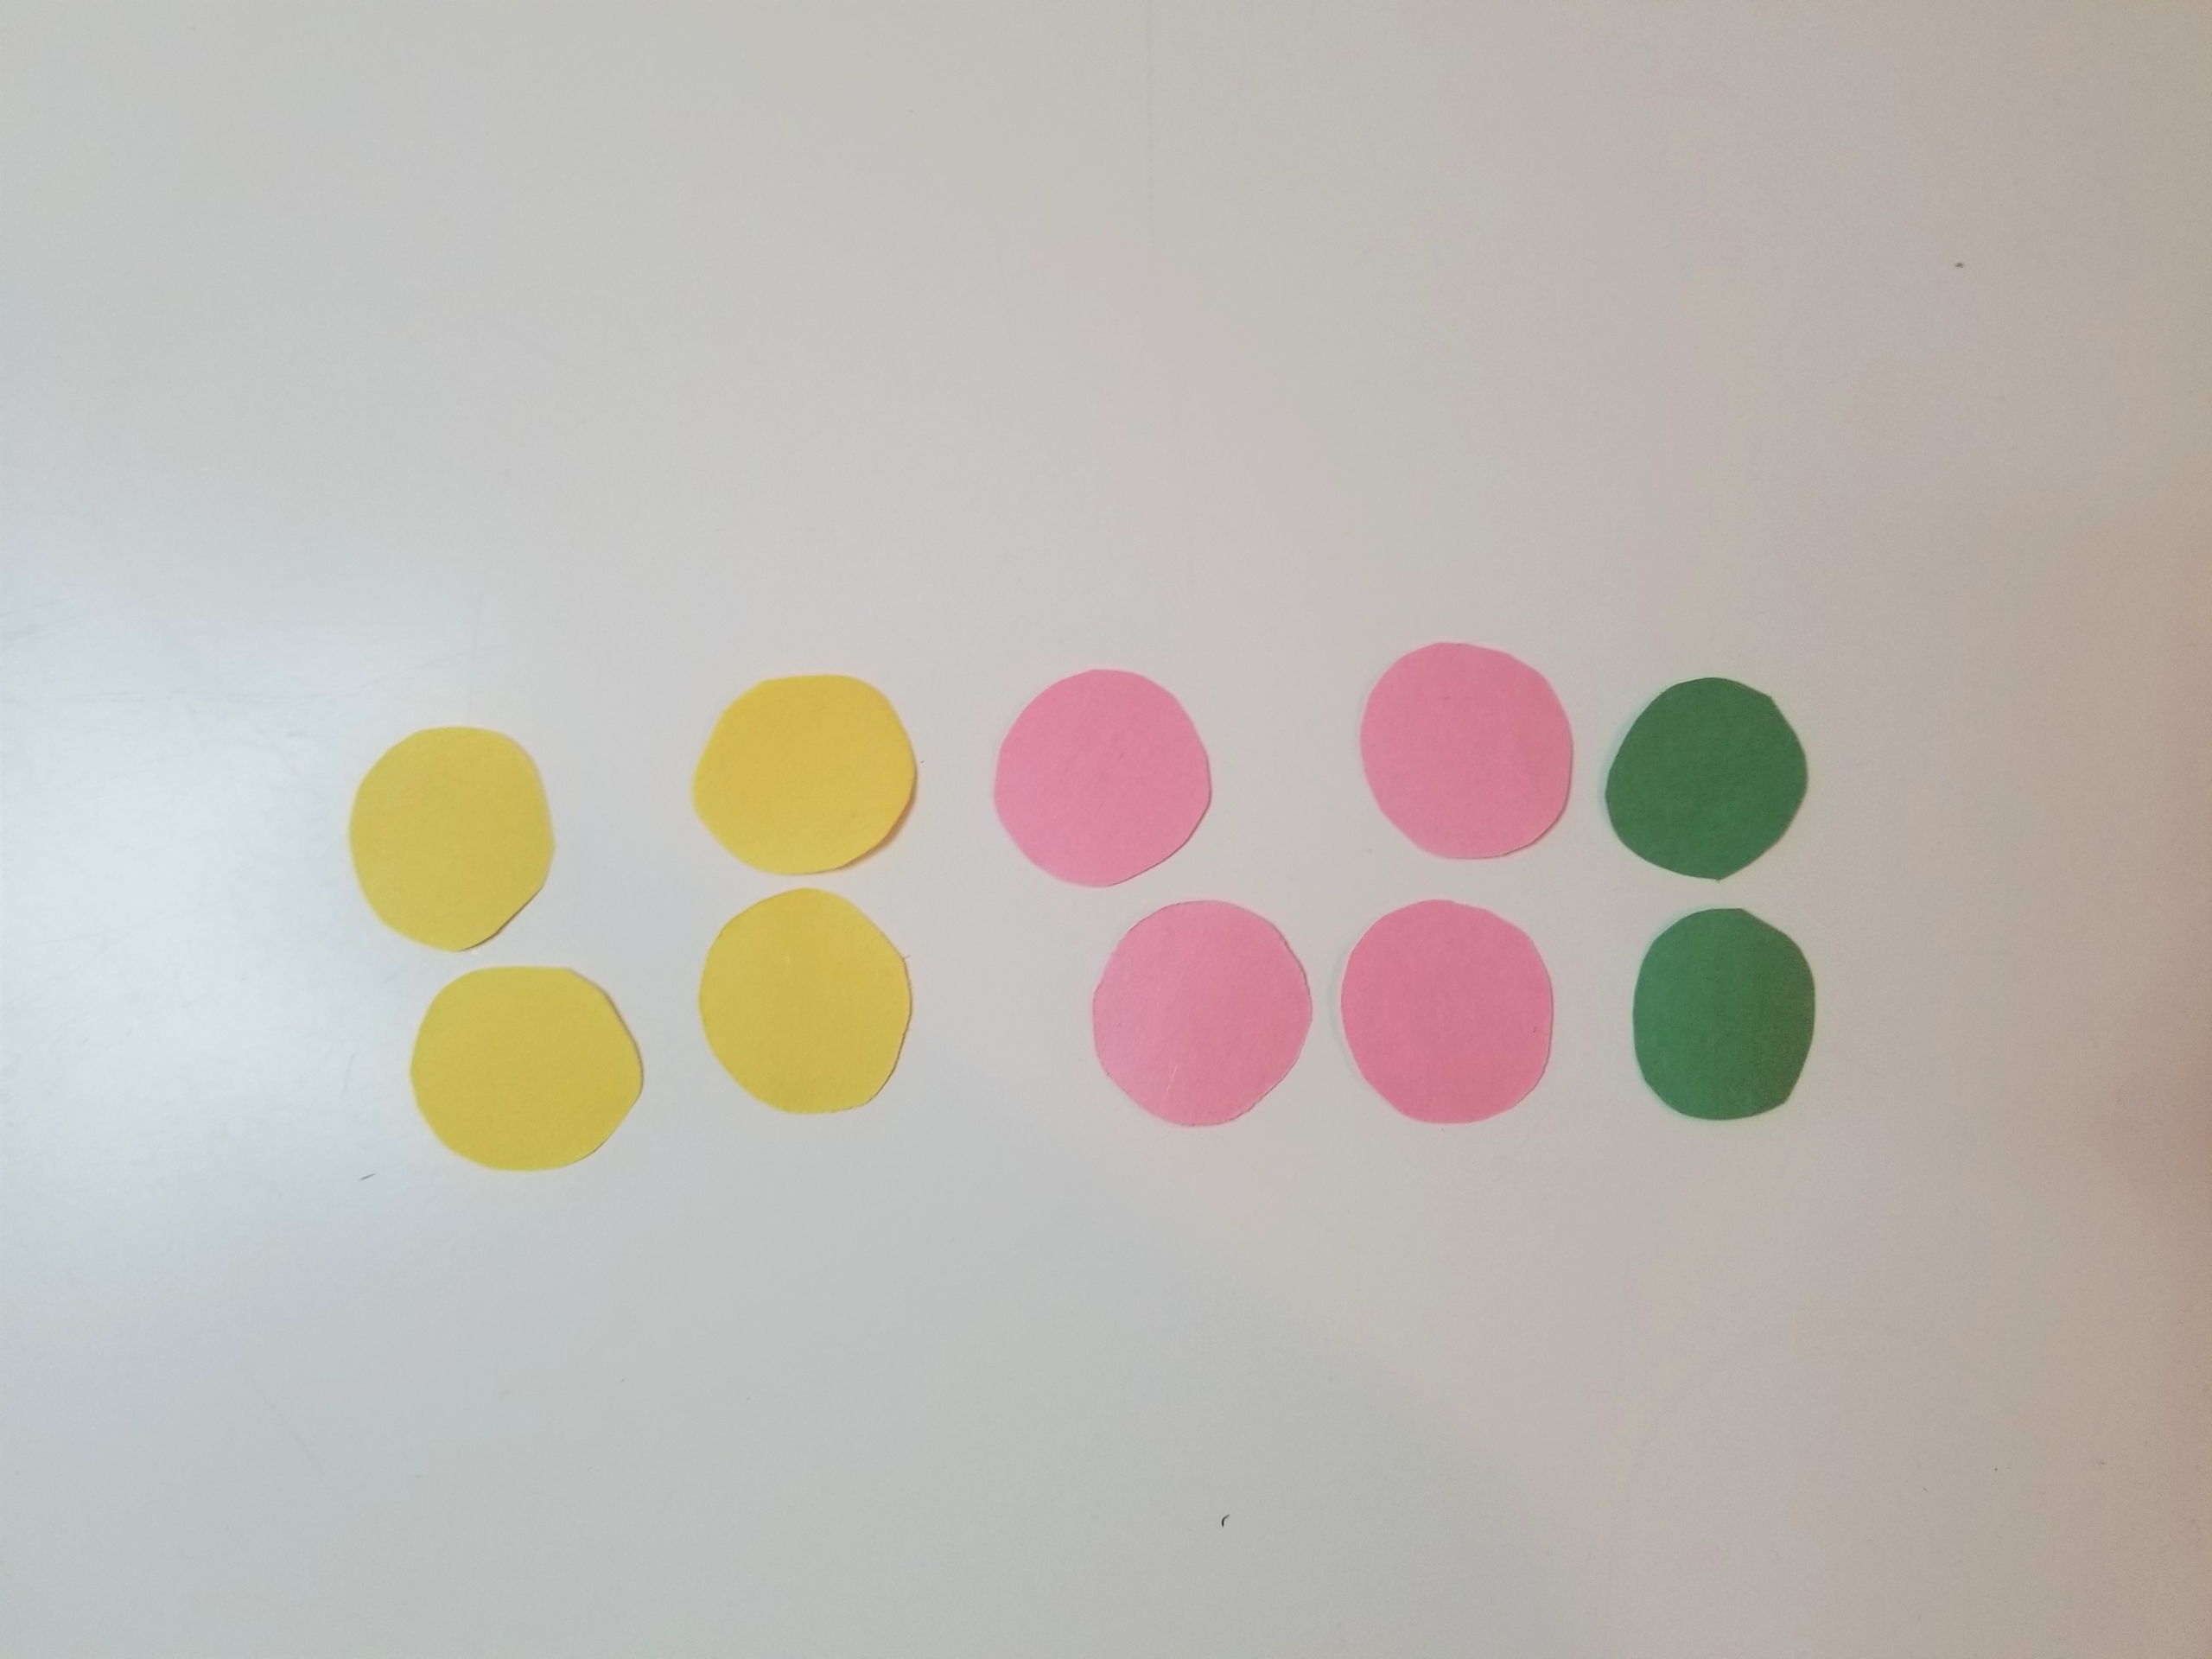 Circles cut out of colorful paper